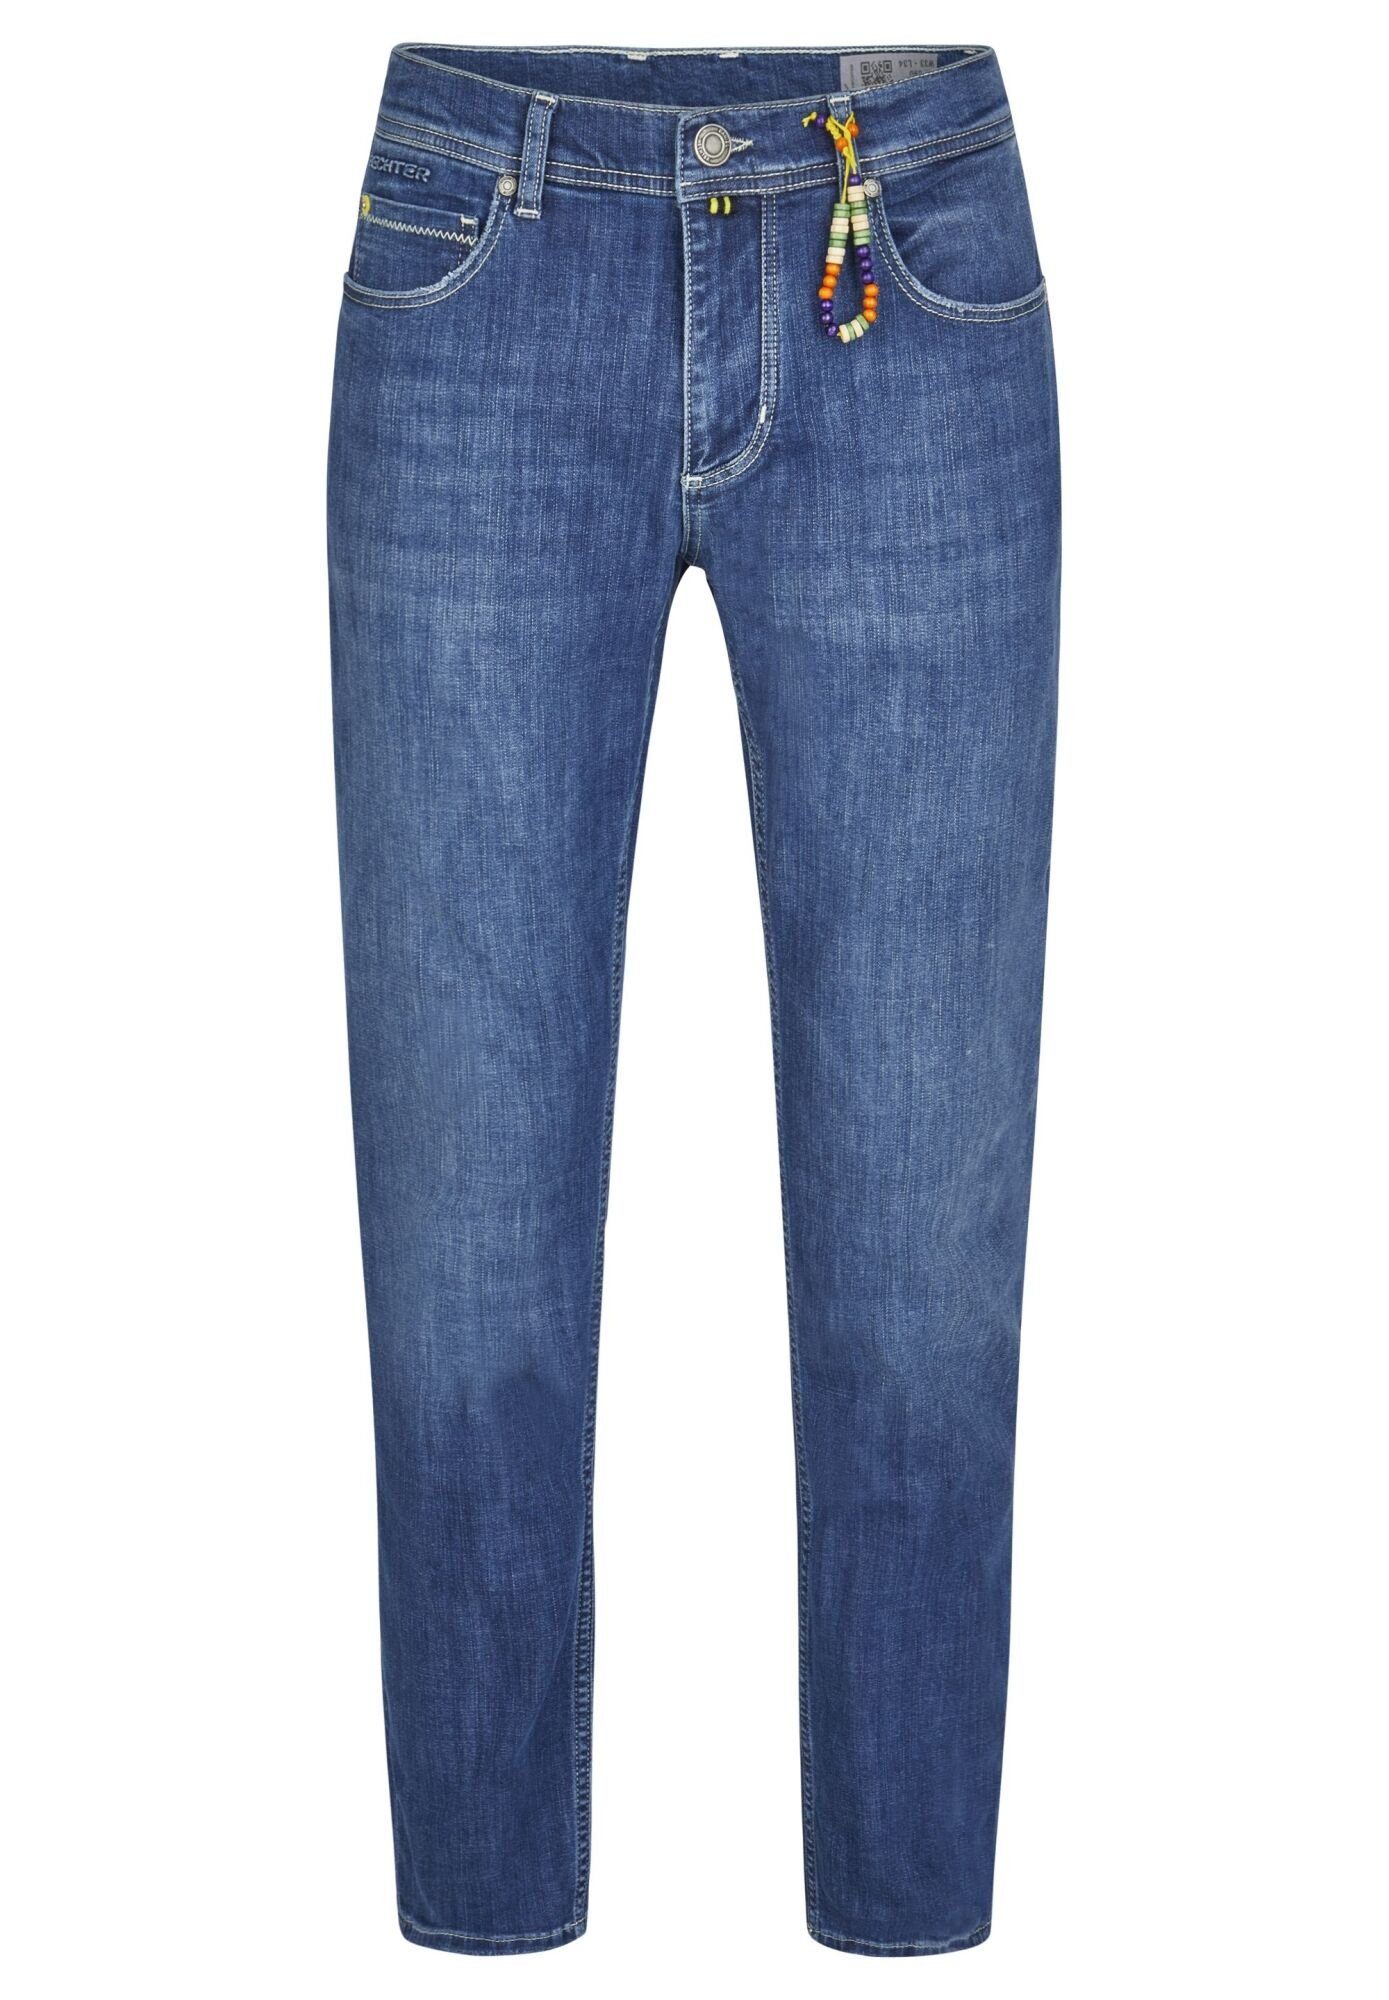 HECHTER PARIS Straight-Jeans im Stone-Washed-Look blue steel